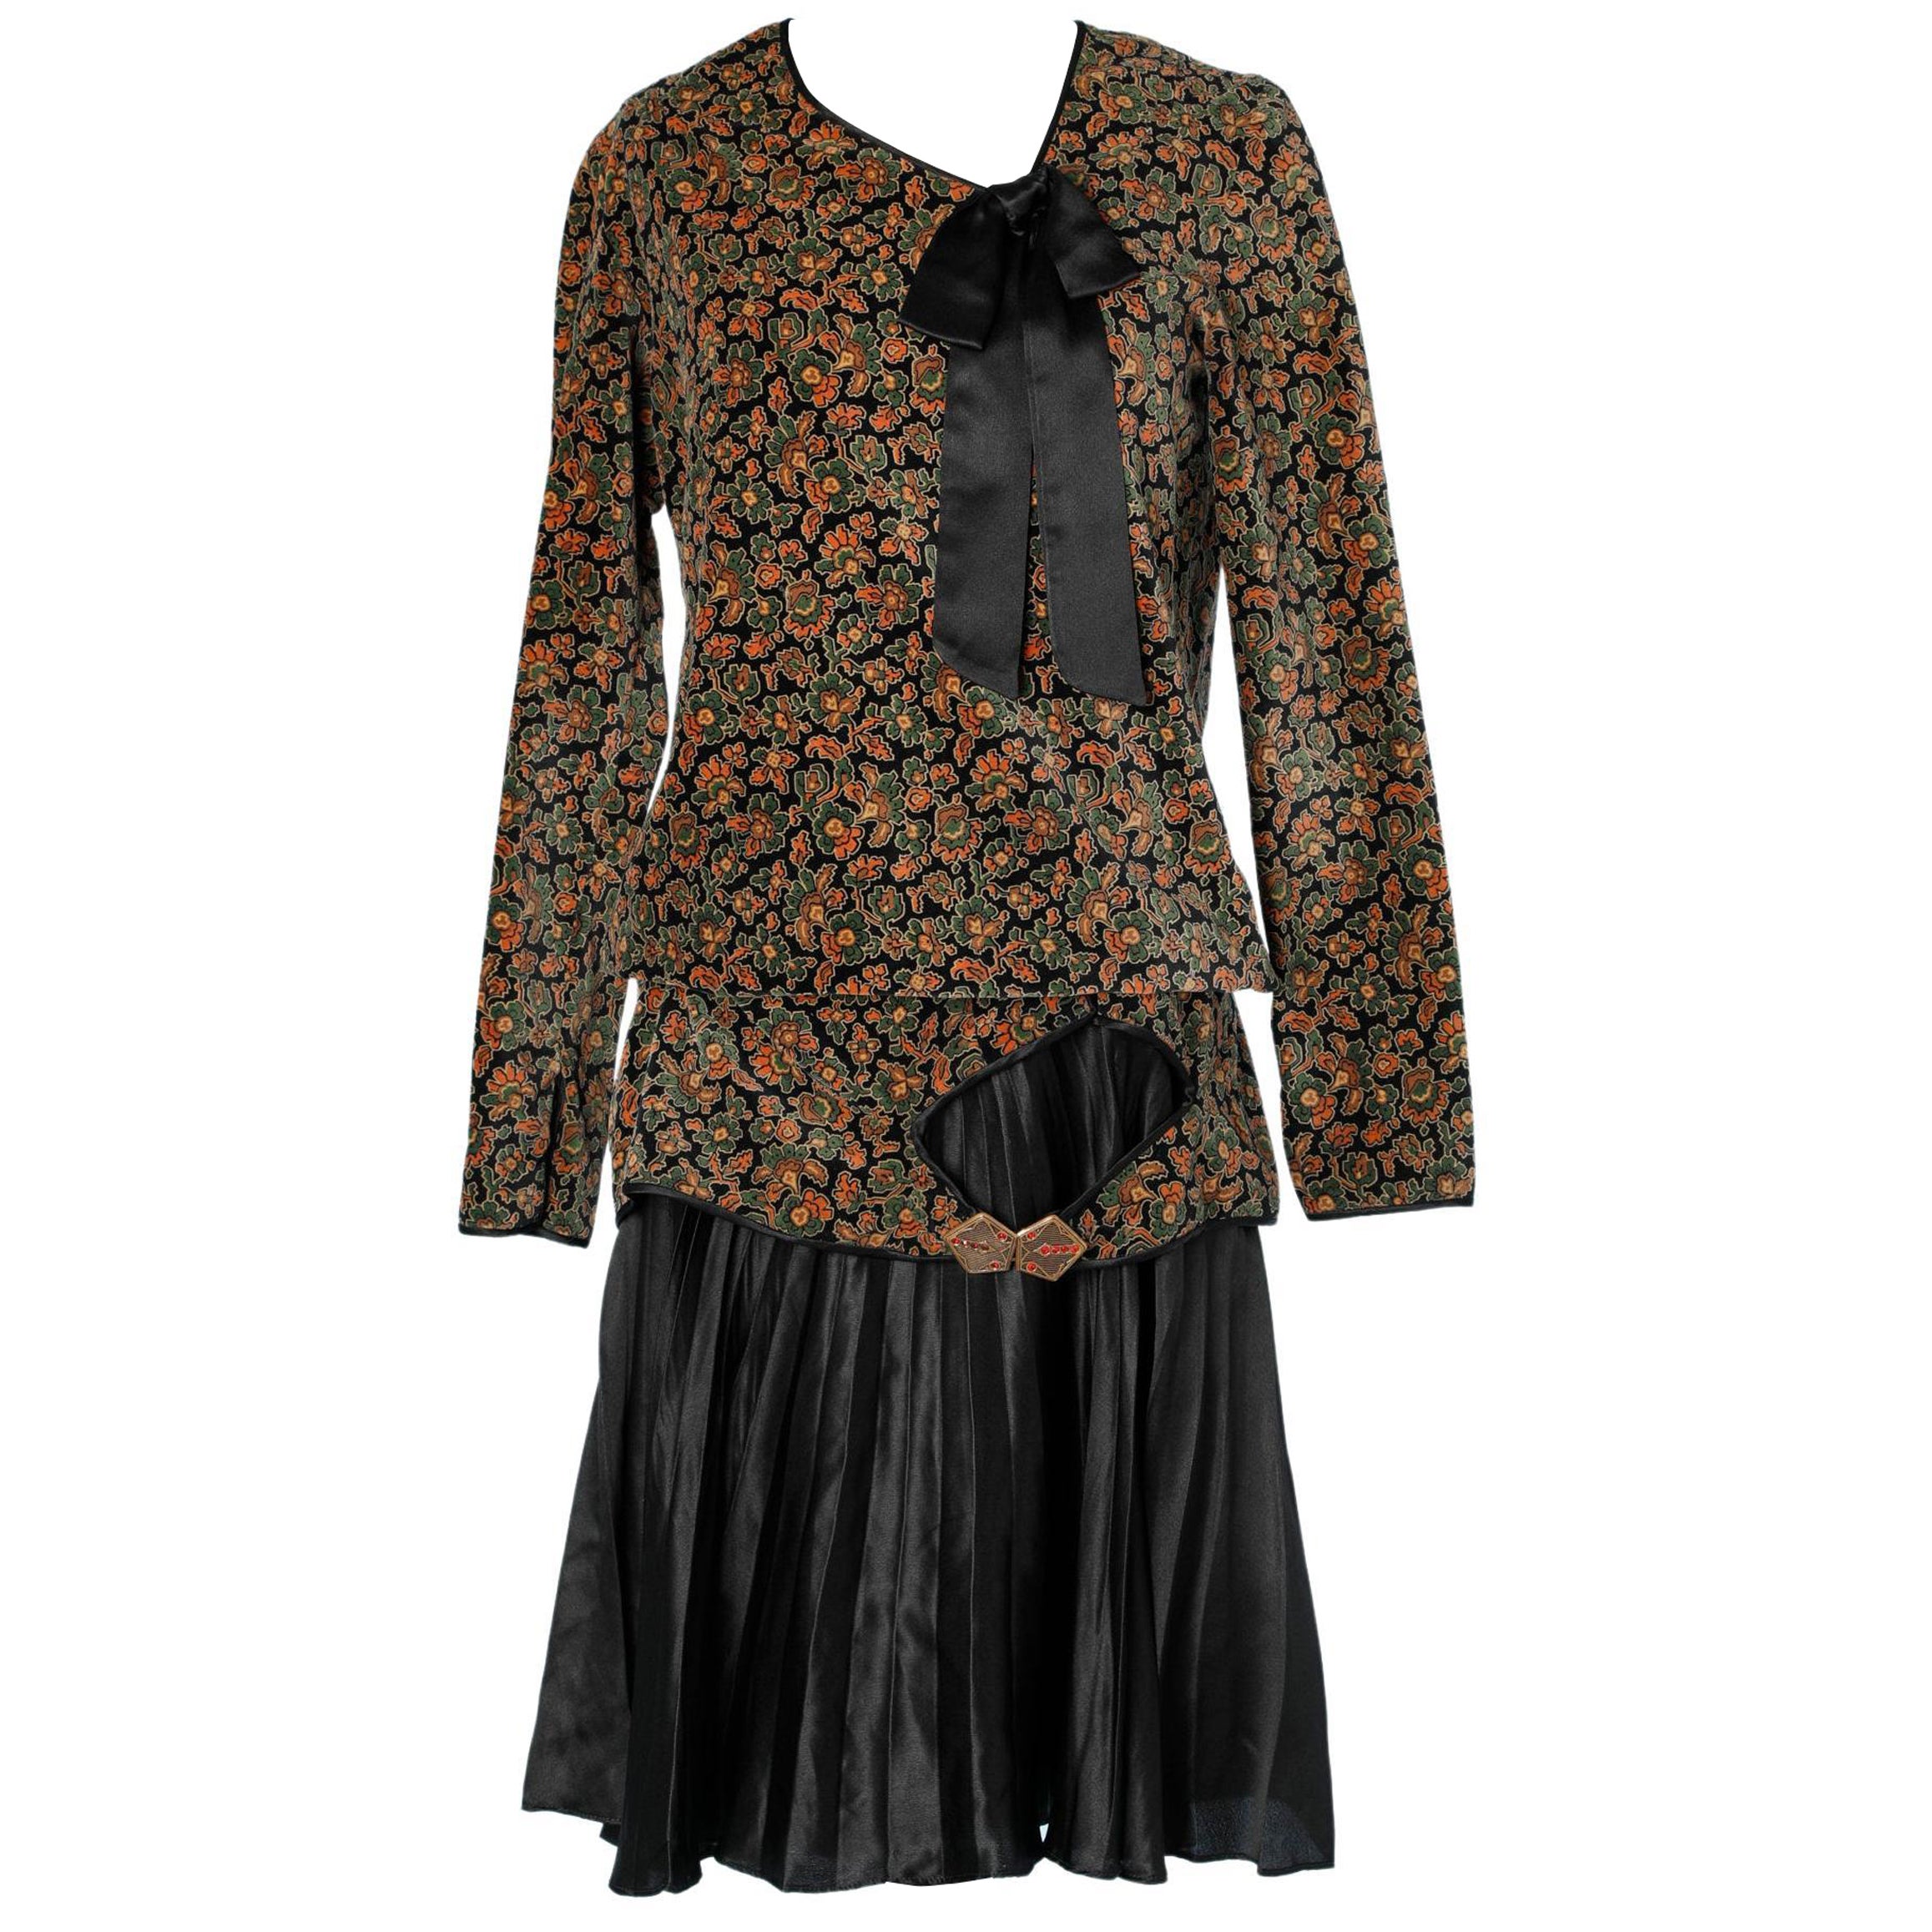 1920's dress in "trompe l'oeil" ( as top and skirt) in printed velvet and satin 